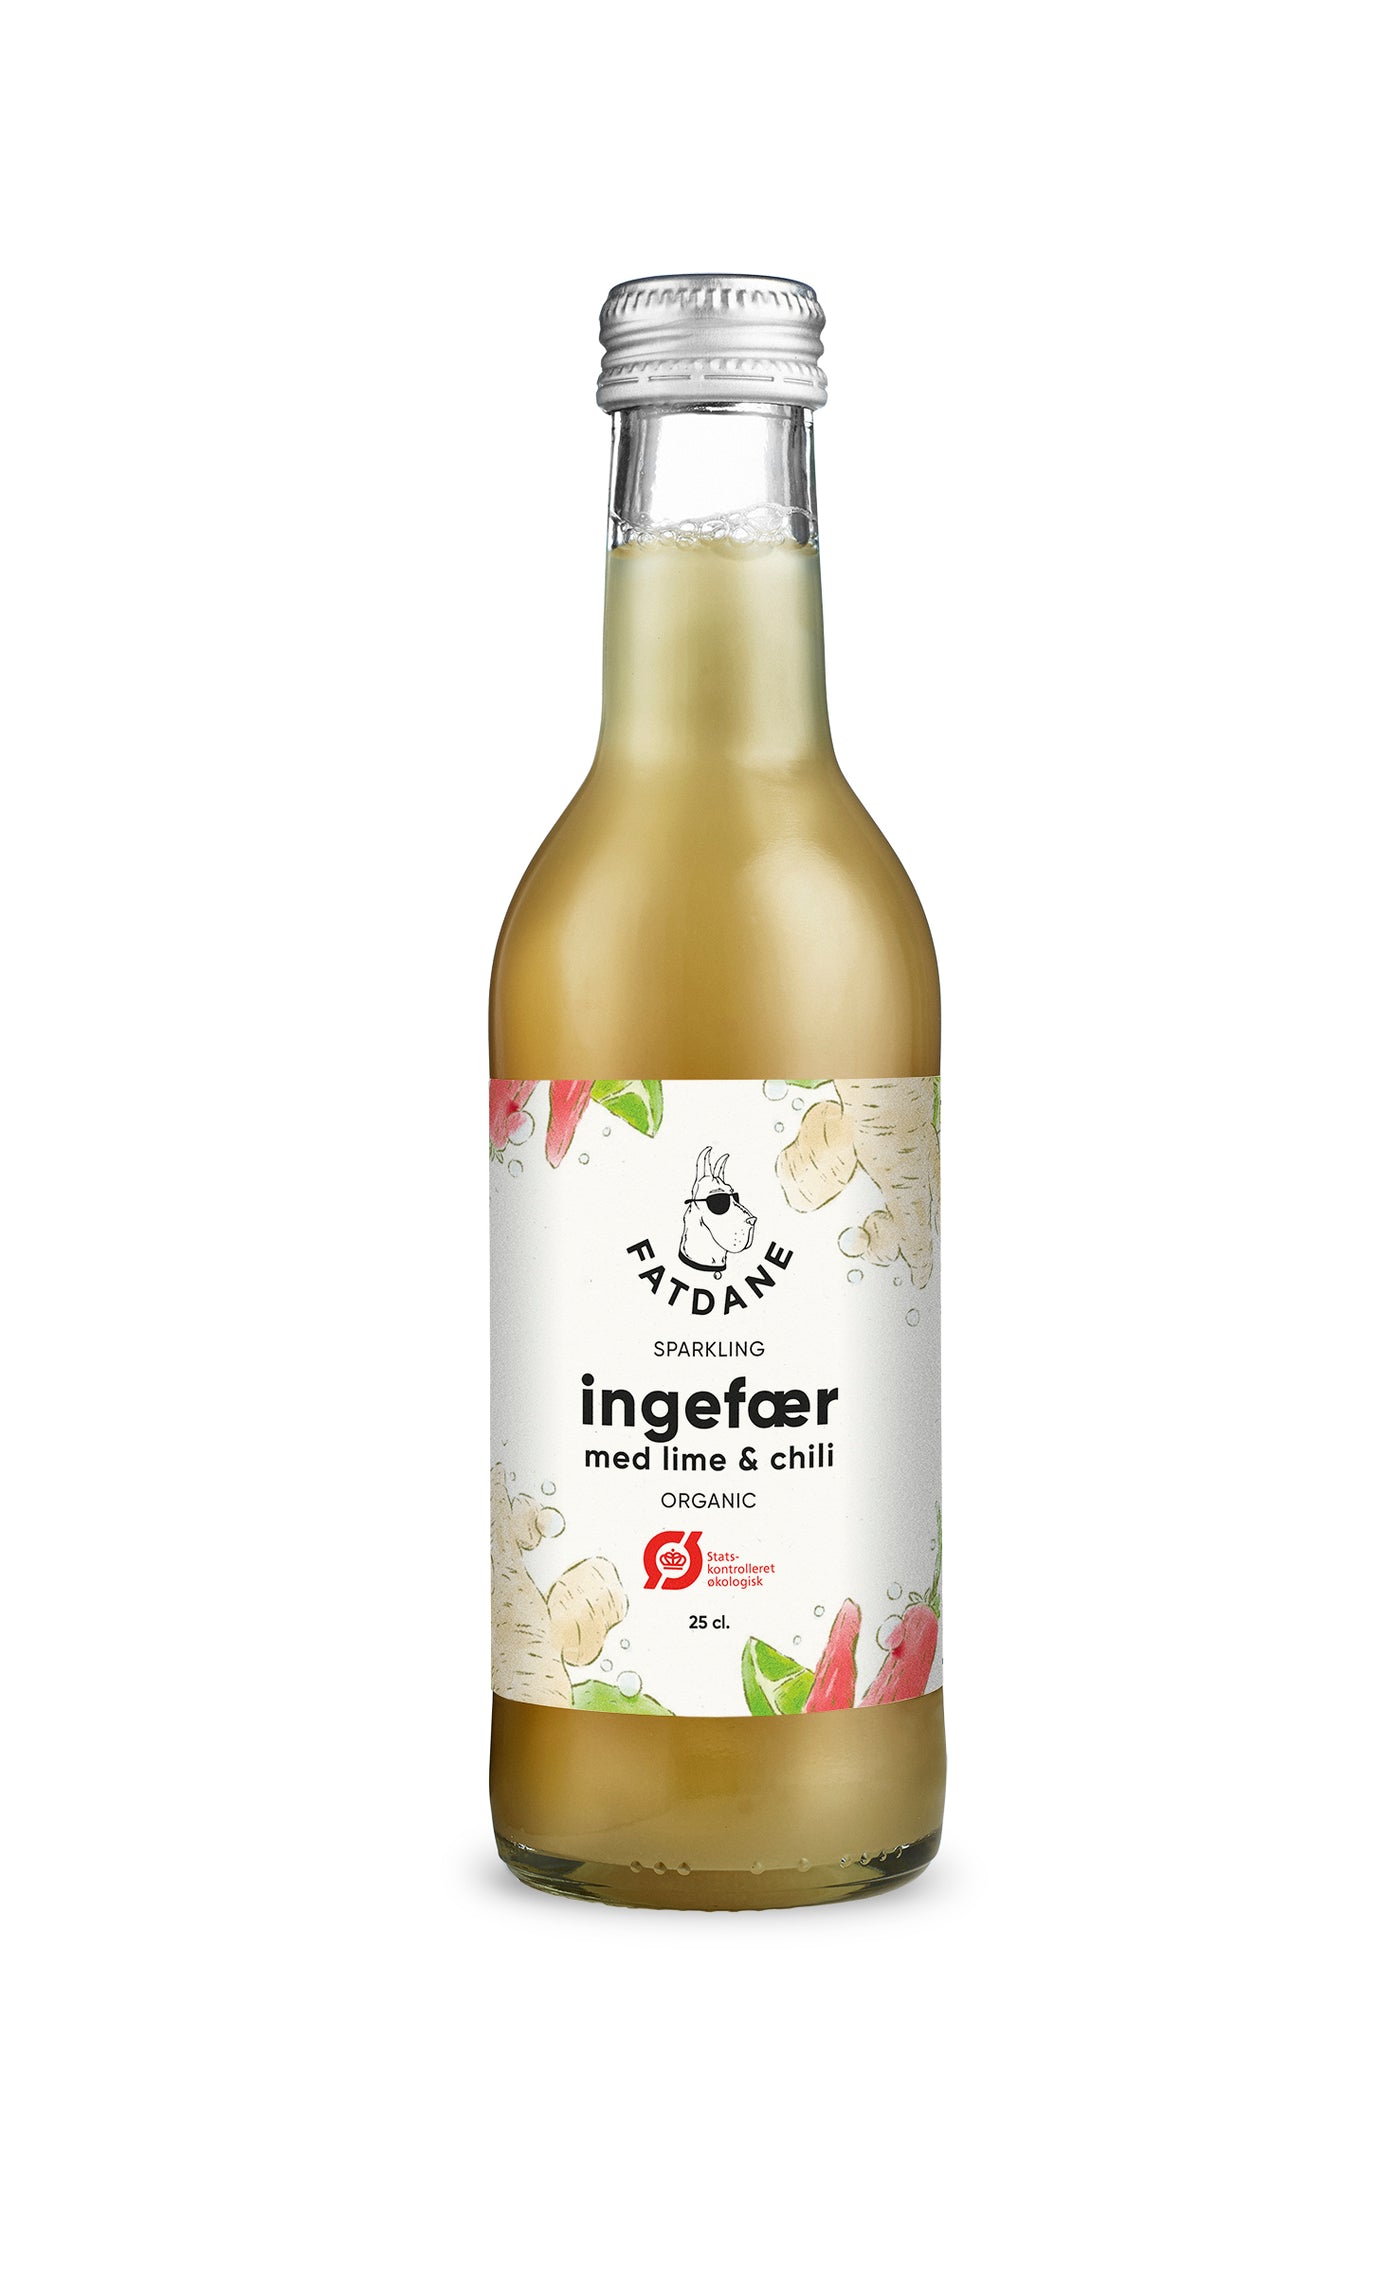 Fatdane Ginger with Lime & Chili, 25 cl.